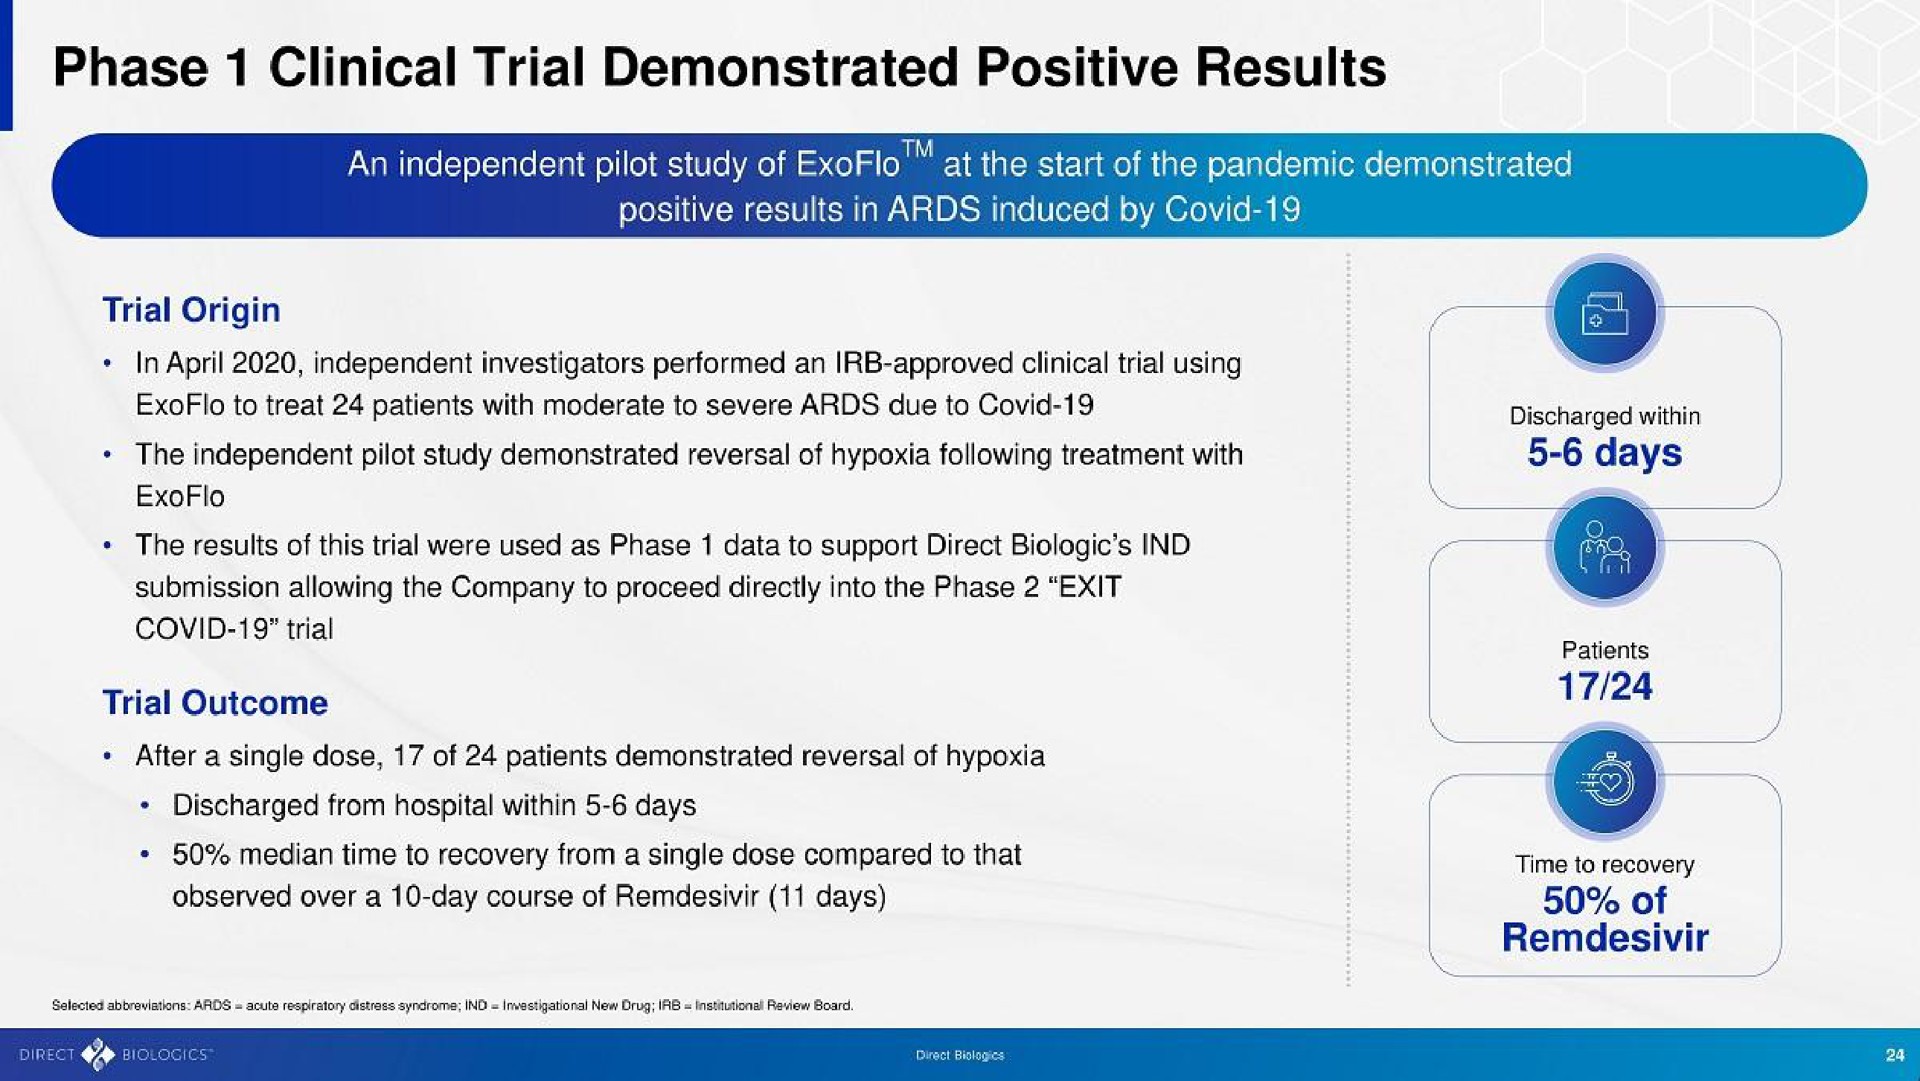 phase clinical trial demonstrated positive results | Direct Biologics